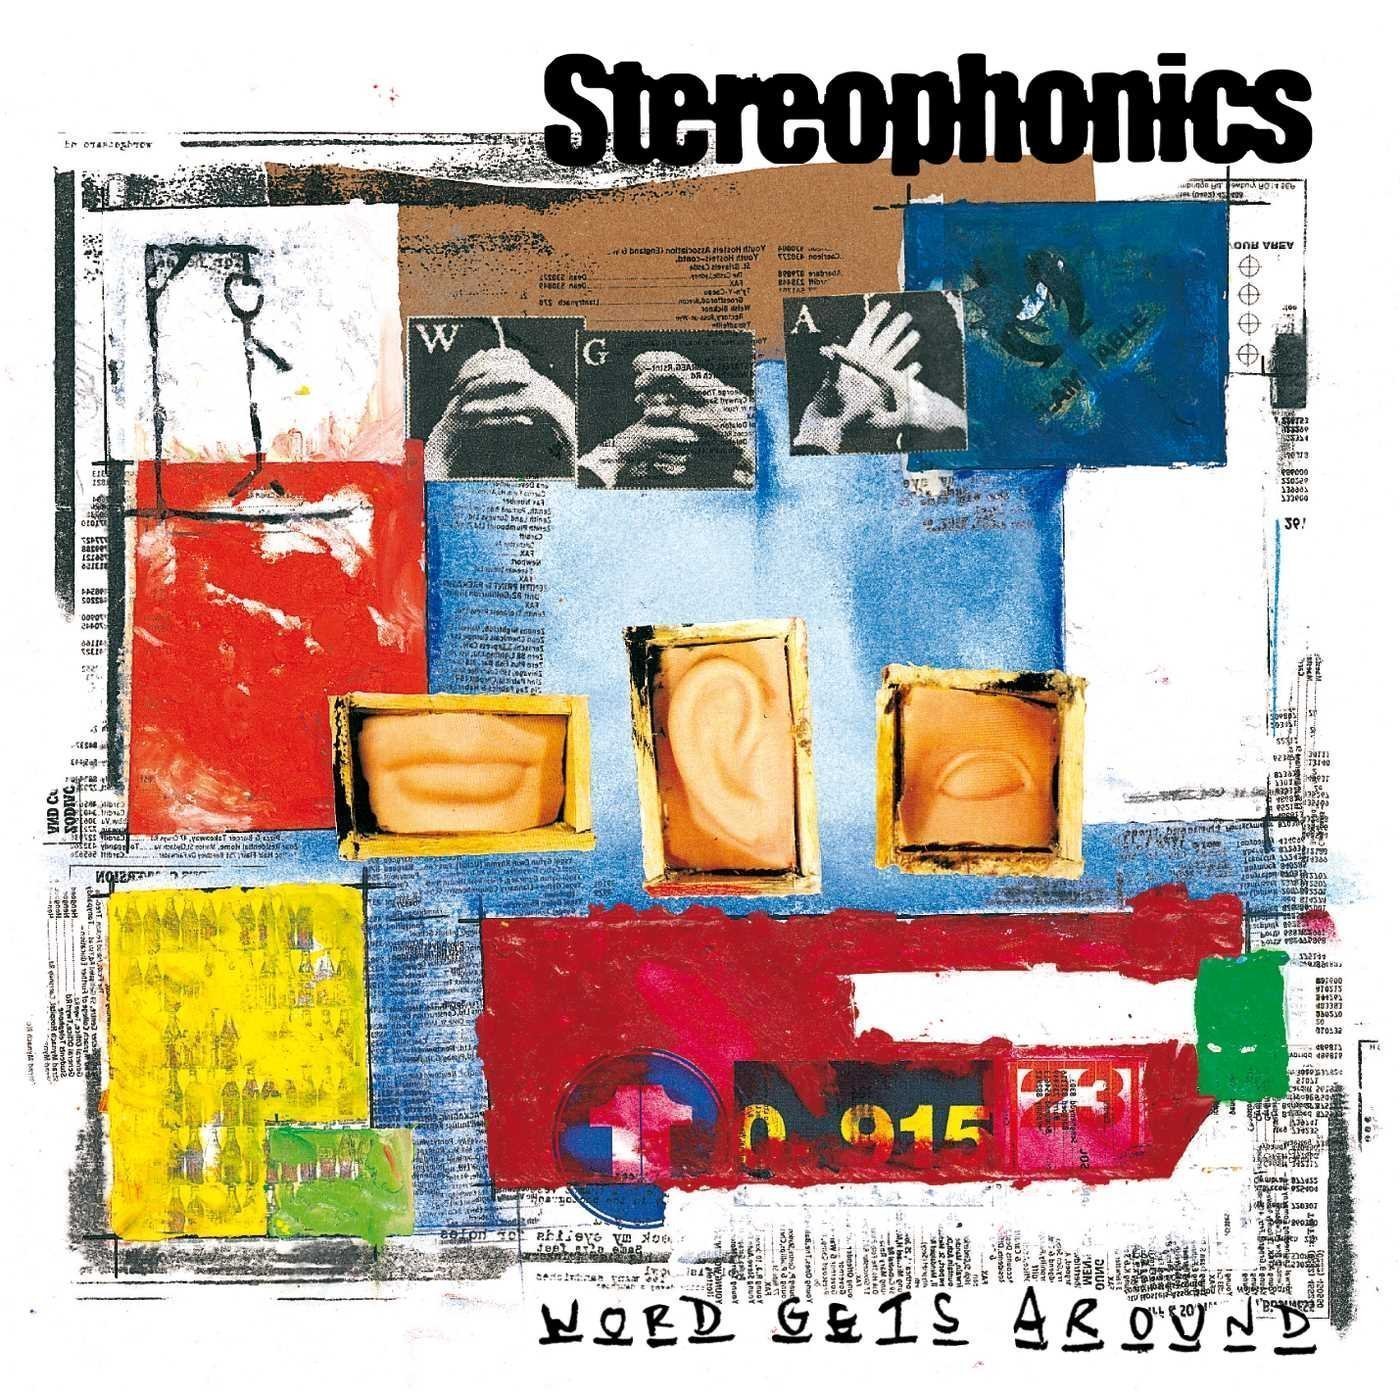 Stereophonics - Word Gets Around (LP) Stereophonics